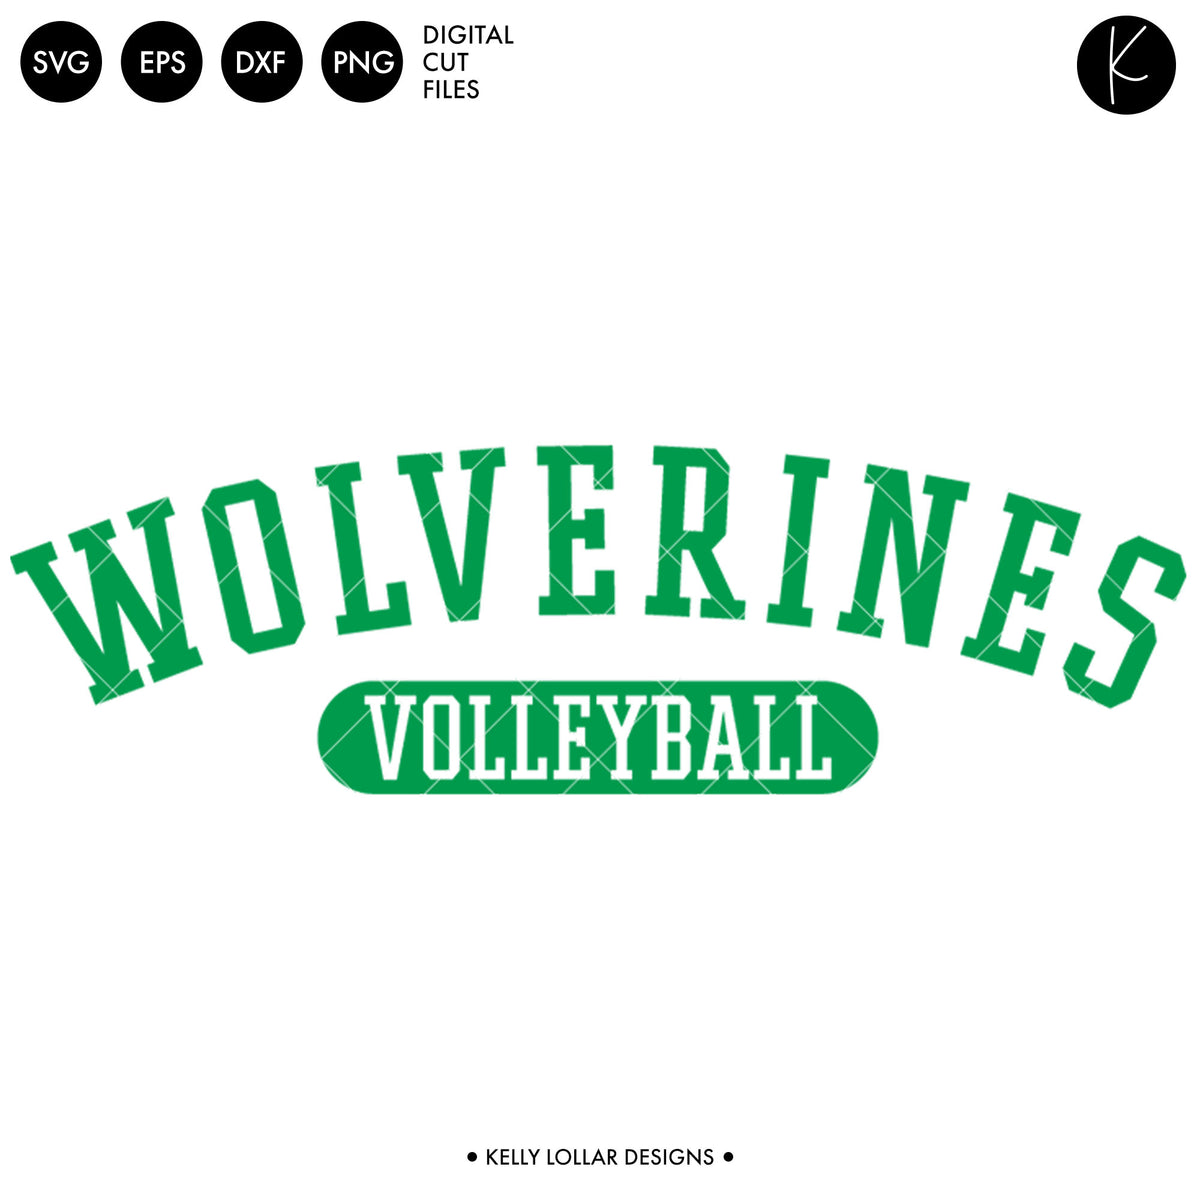 Wolverines Volleyball Bundle | SVG DXF EPS PNG Cut Files